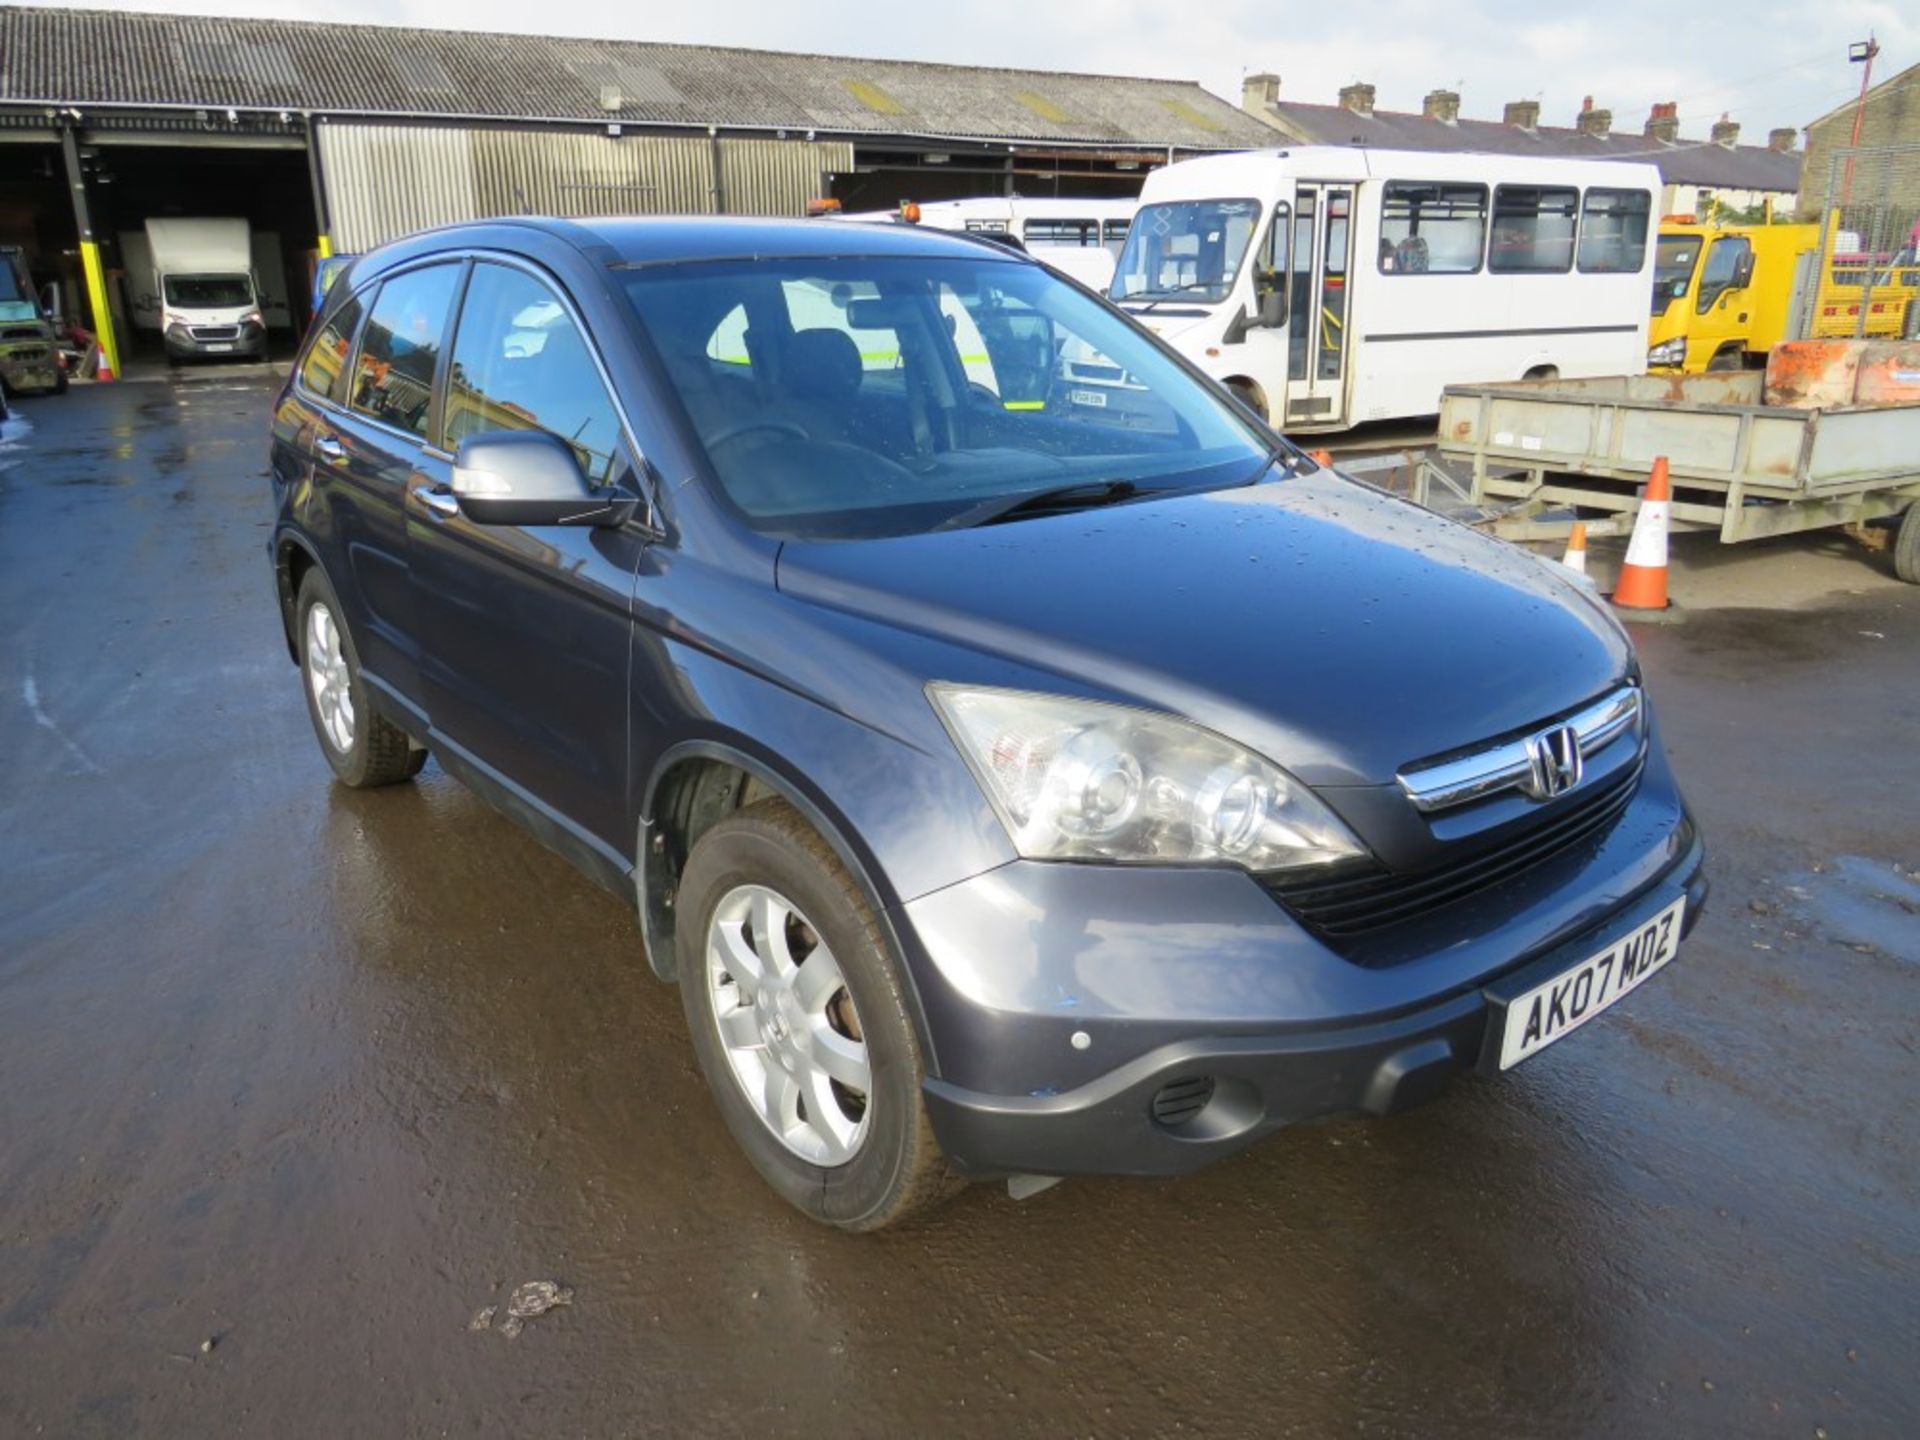 07 reg HONDA CR-V SE I-CTDI, 1ST REG 05/07, TEST 10/21, 150456M, V5 HERE, 3 FORMER KEEPERS [NO VAT]